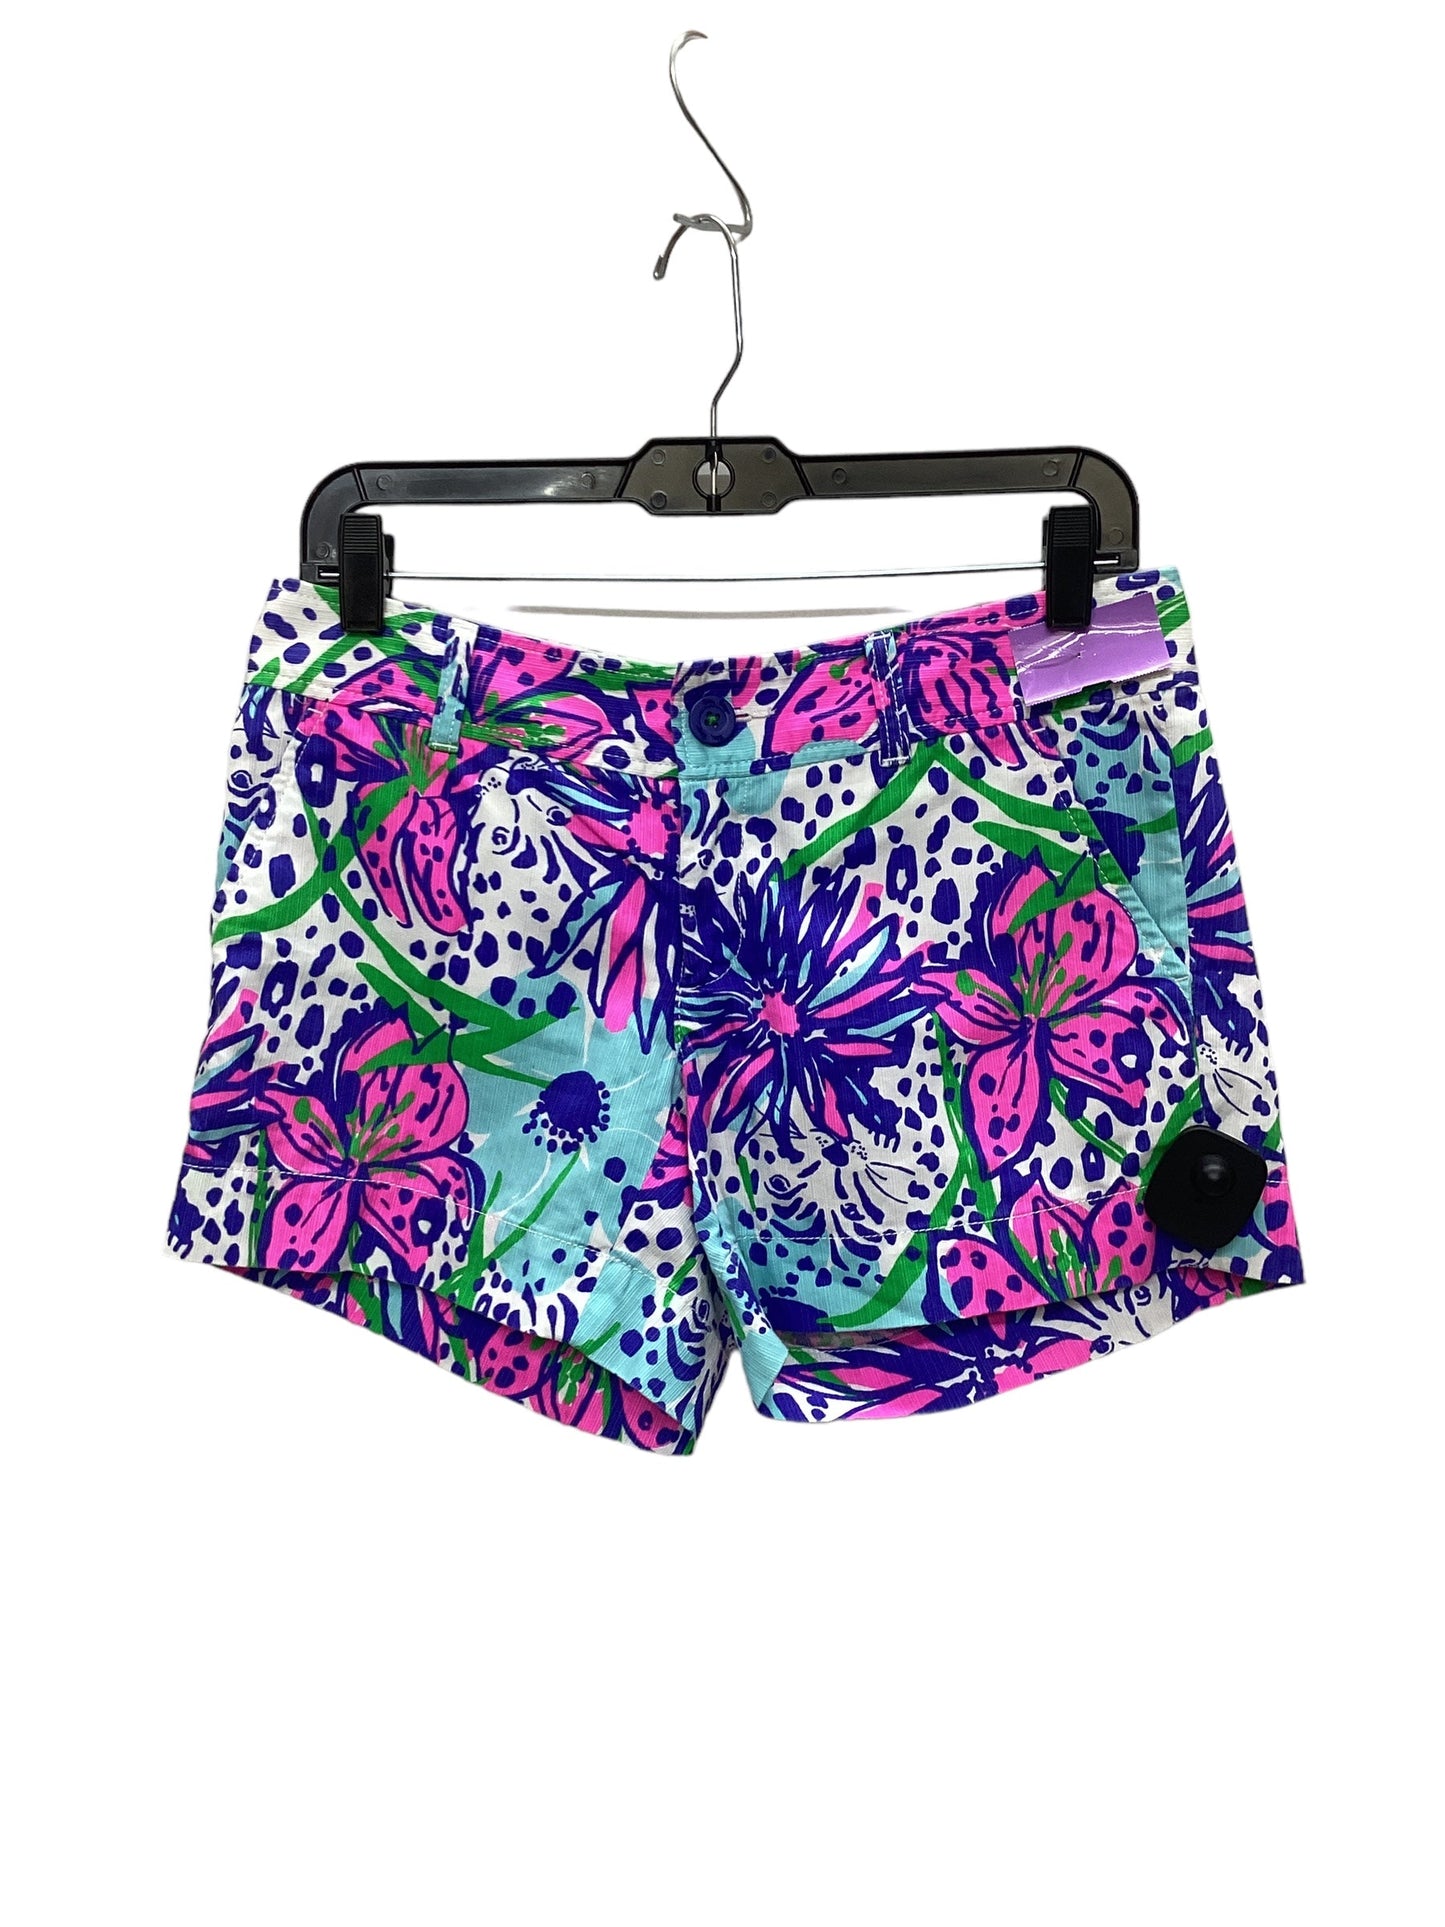 Blue & Green Shorts Lilly Pulitzer, Size 2